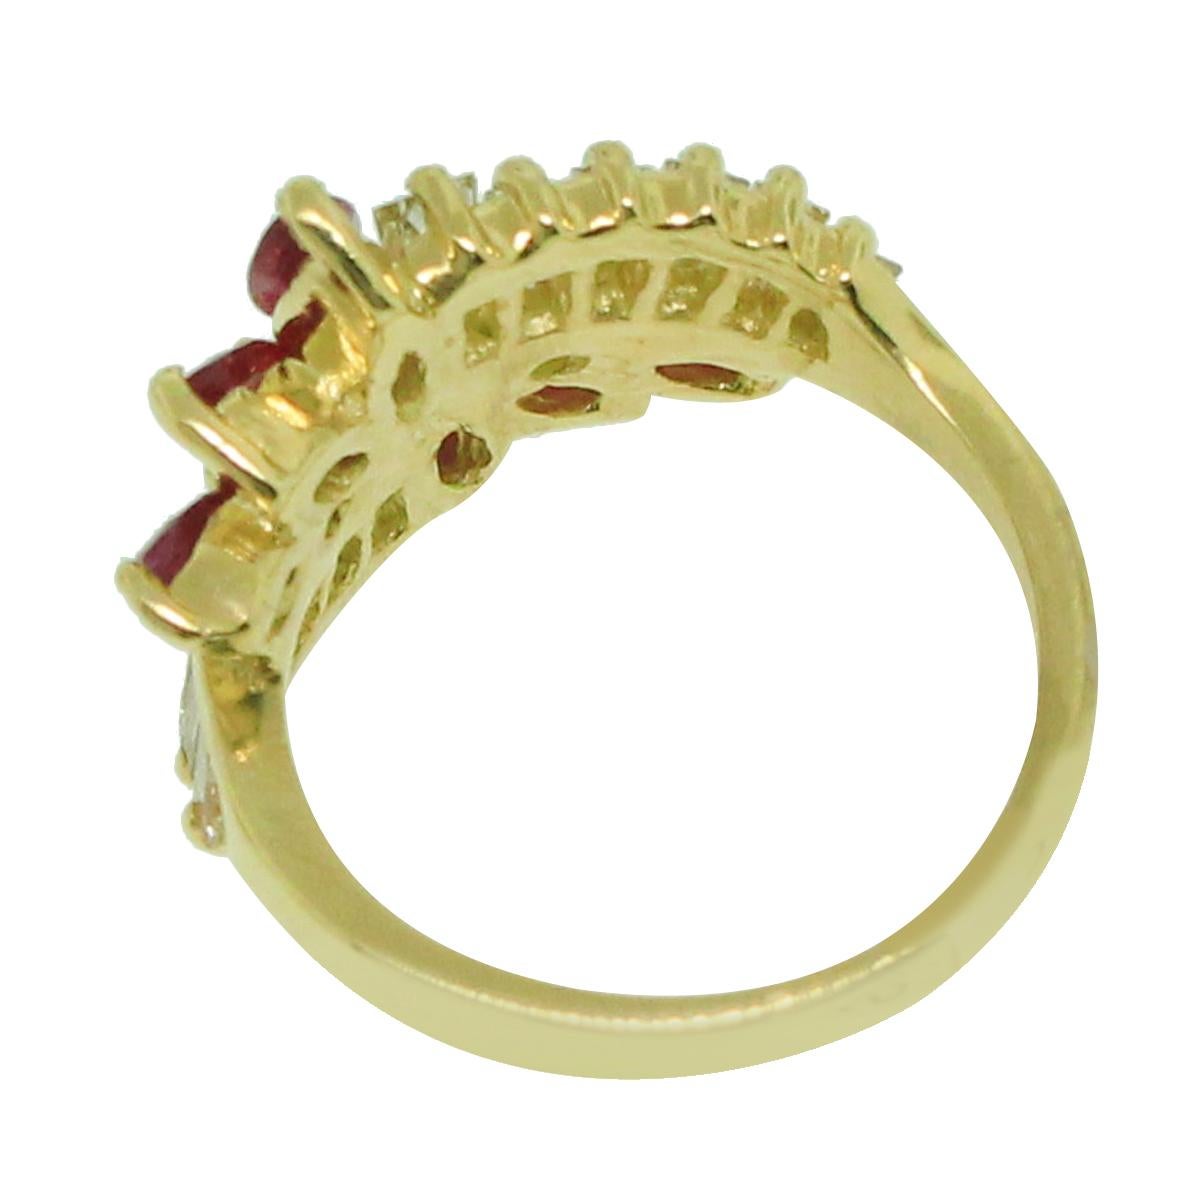 Material: 18k Yellow Gold
Gemstone Details: Approximately 0.70ctw marquise shapes ruby gemstones
Diamond Details: Approximately 0.80 baguette diamonds. Diamonds are J/K in color and SI1 in clarity.
Ring Size: 6 (can be sized)
Total Weight: 7.4g